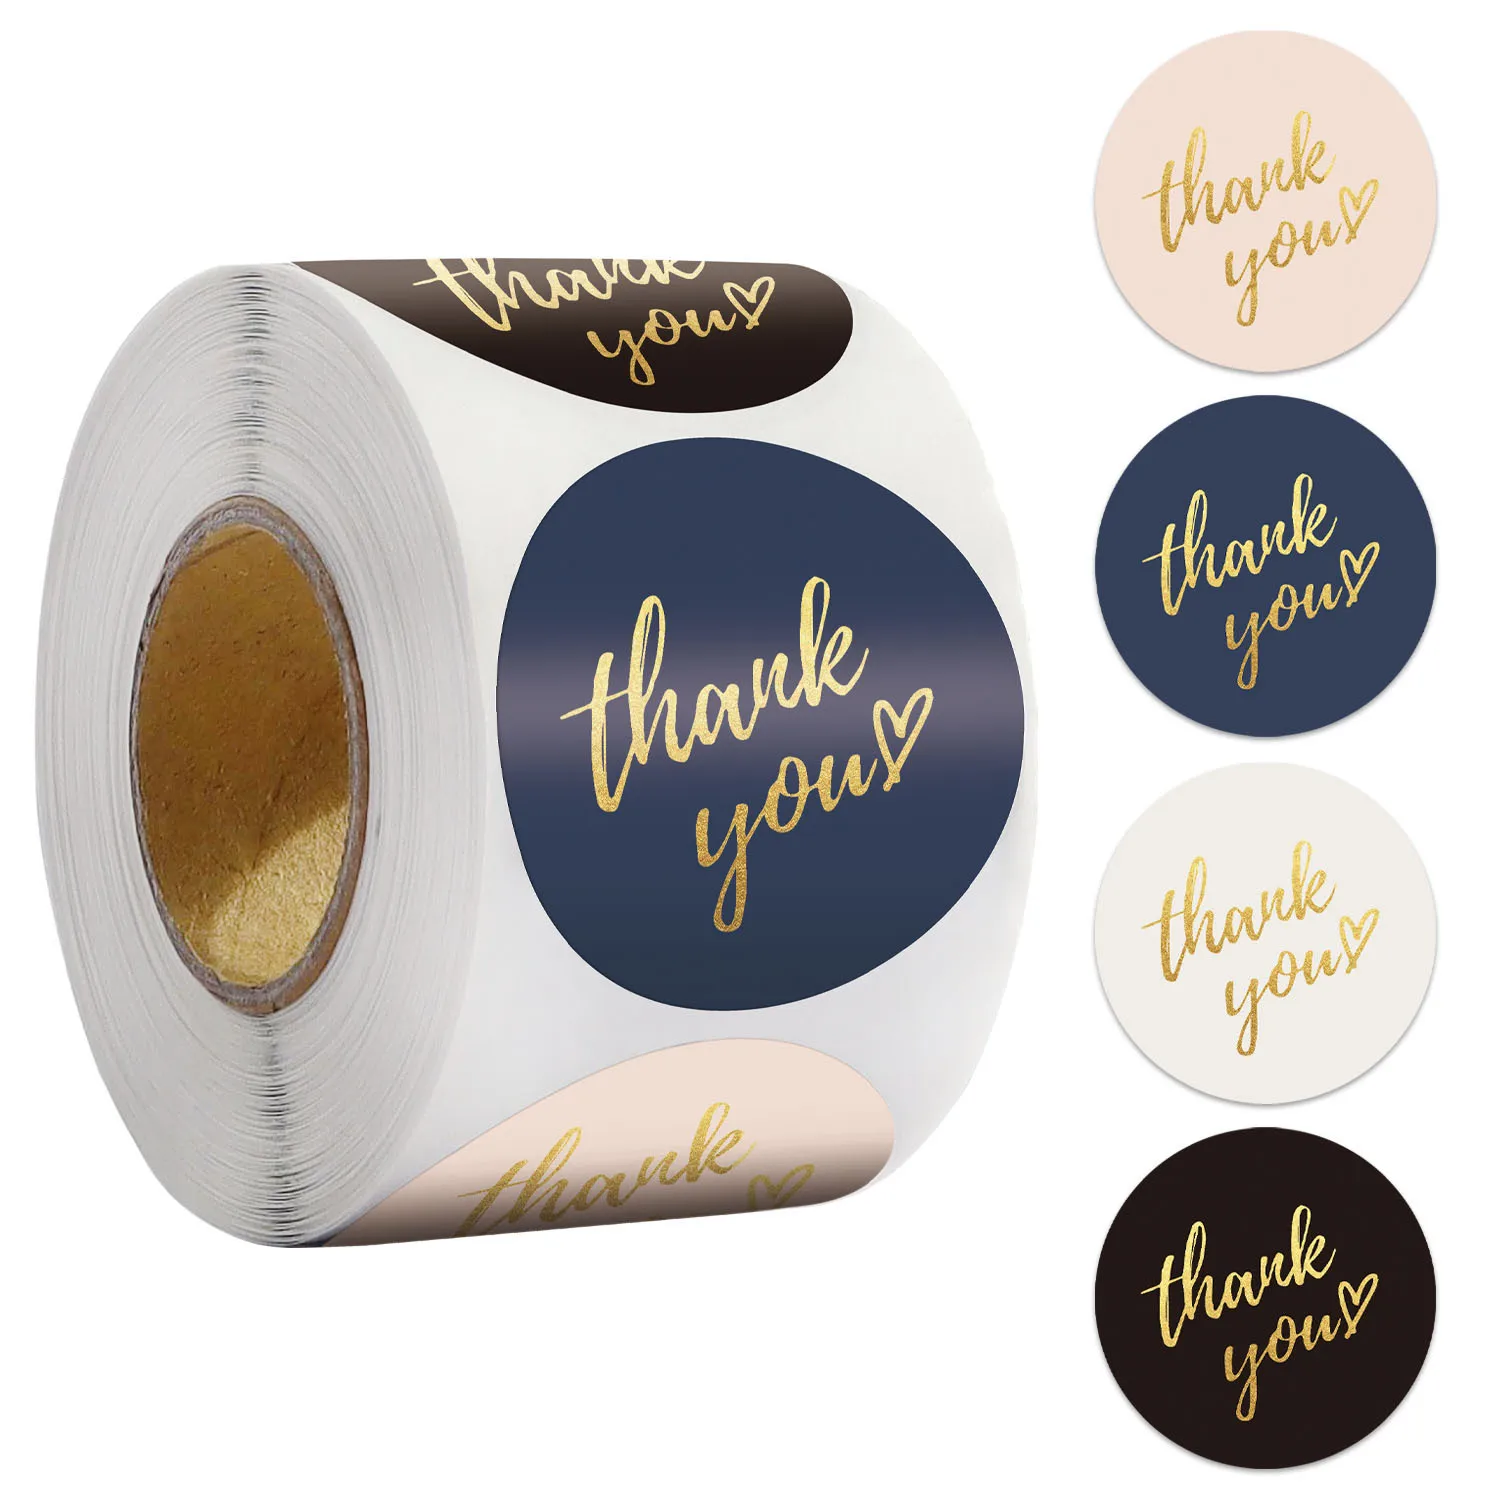 

500pcs/lot Thank You Round Stickers Seal Labels Envelope Seal Tags for Gift Jewelry Box Decoration Stationery Packaging DIY